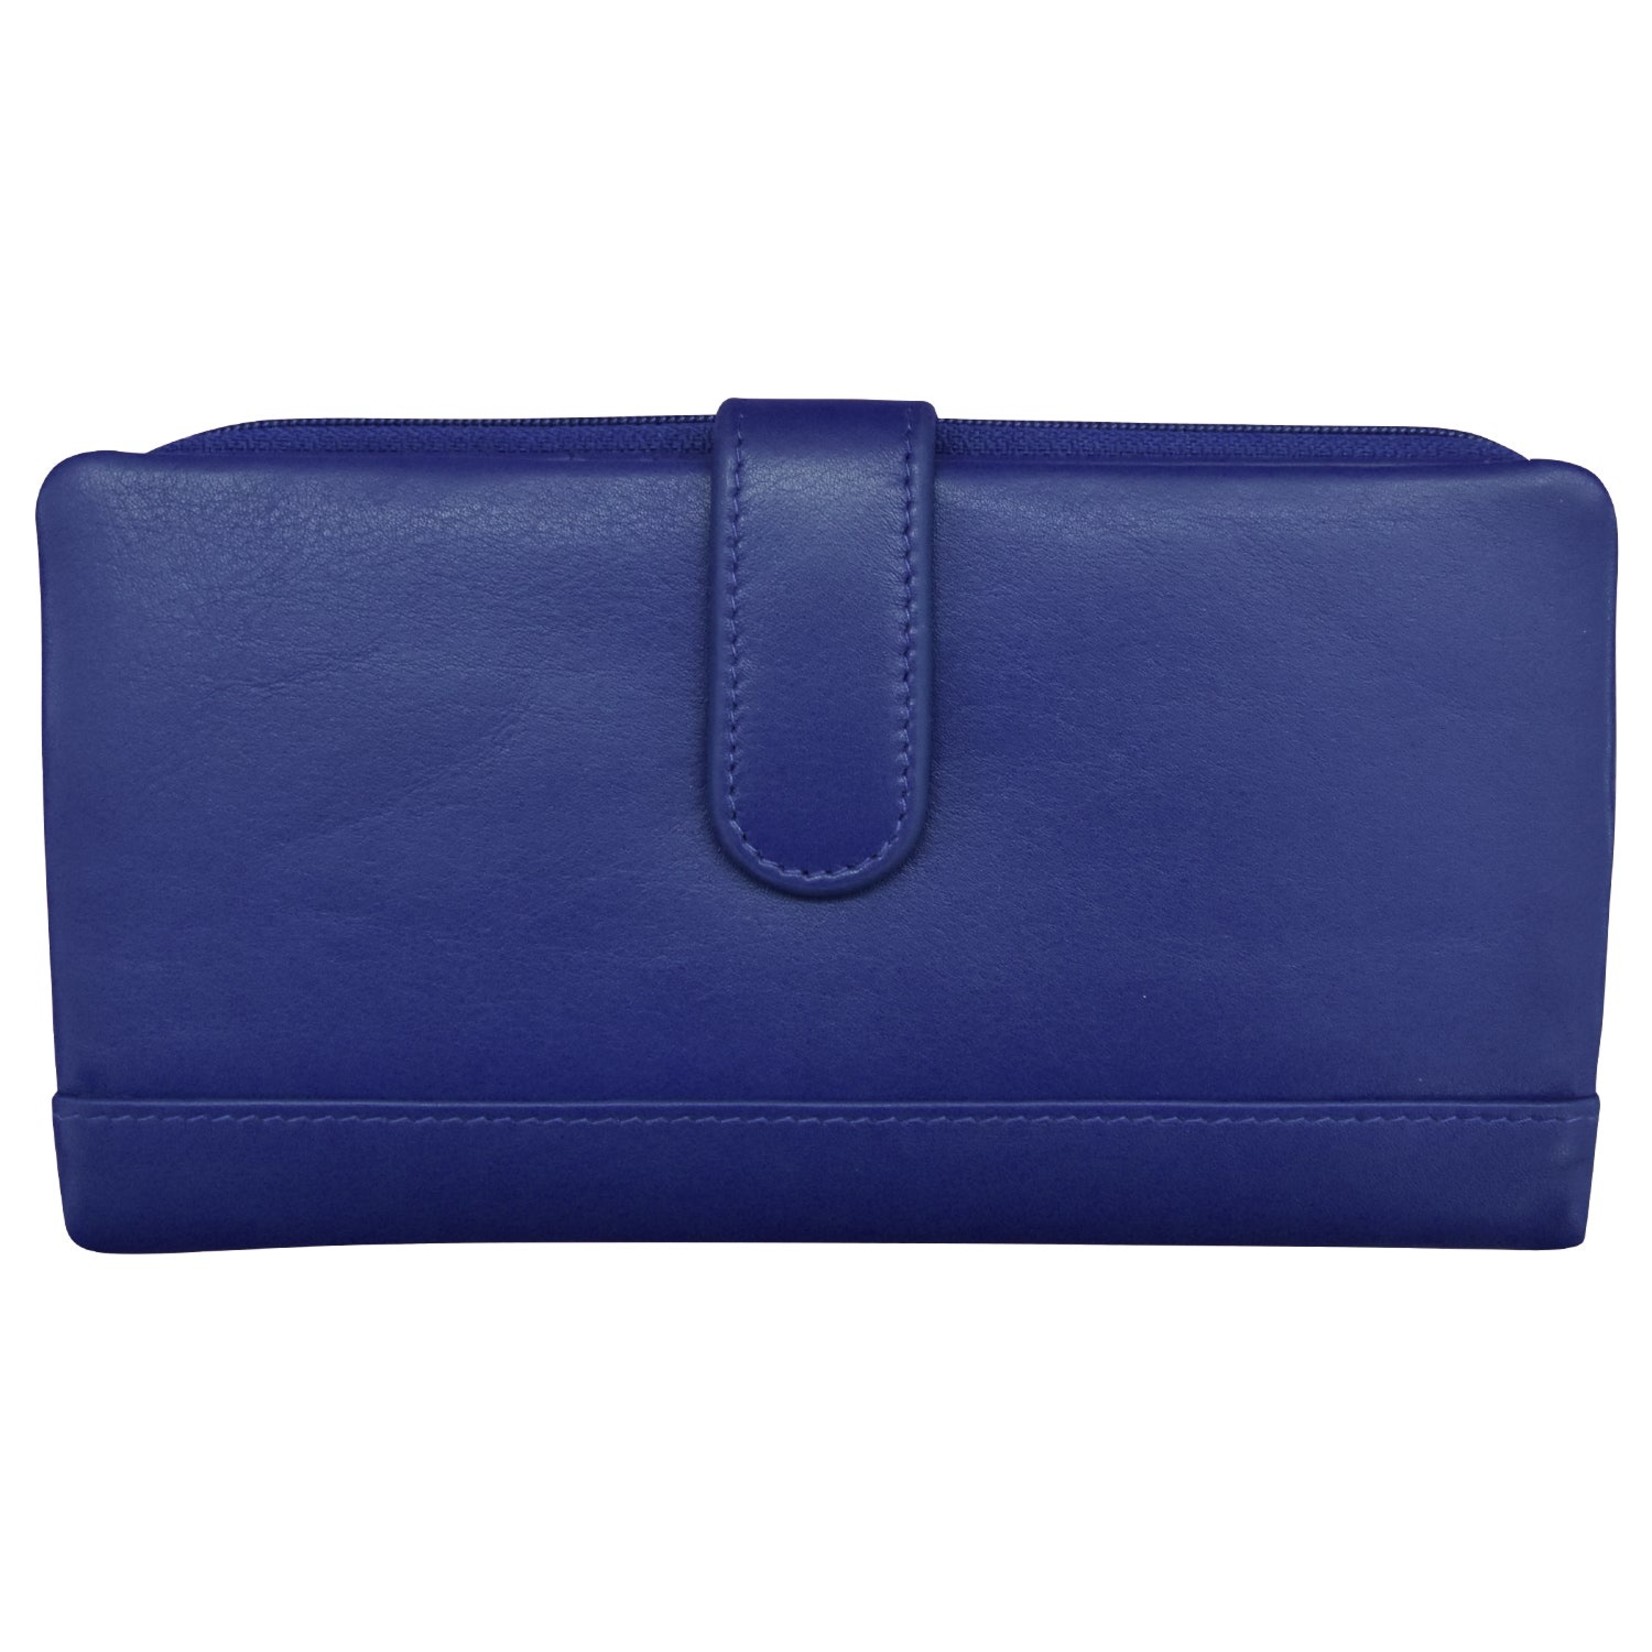 Leather Handbags and Accessories 7420 Cobalt - RFID Smartphone Wallet